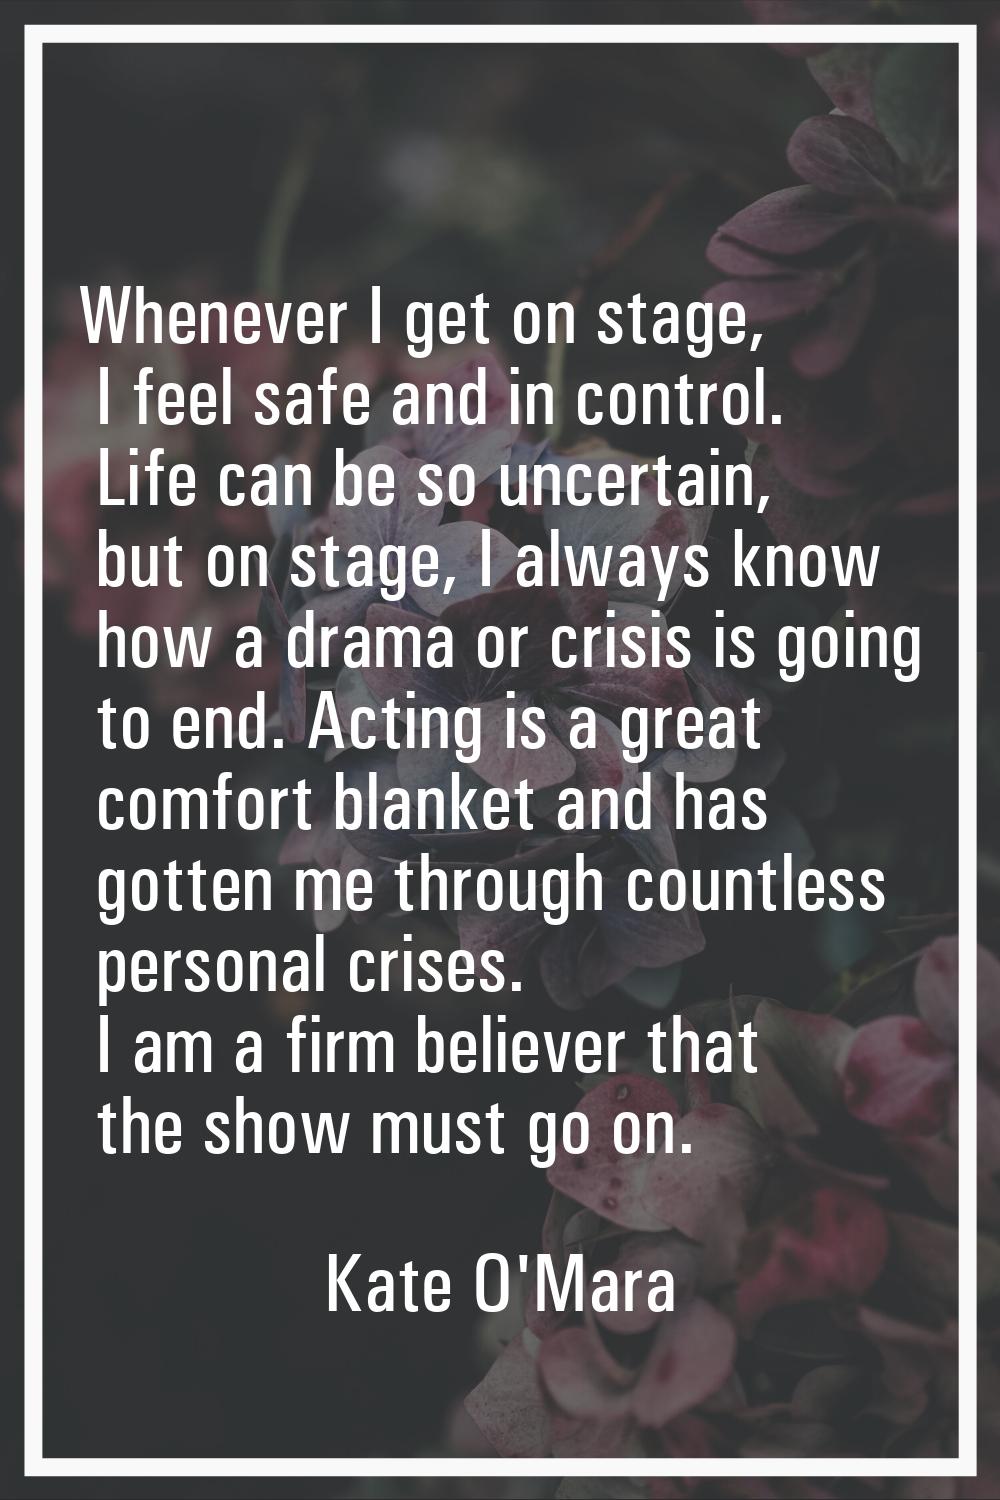 Whenever I get on stage, I feel safe and in control. Life can be so uncertain, but on stage, I alwa